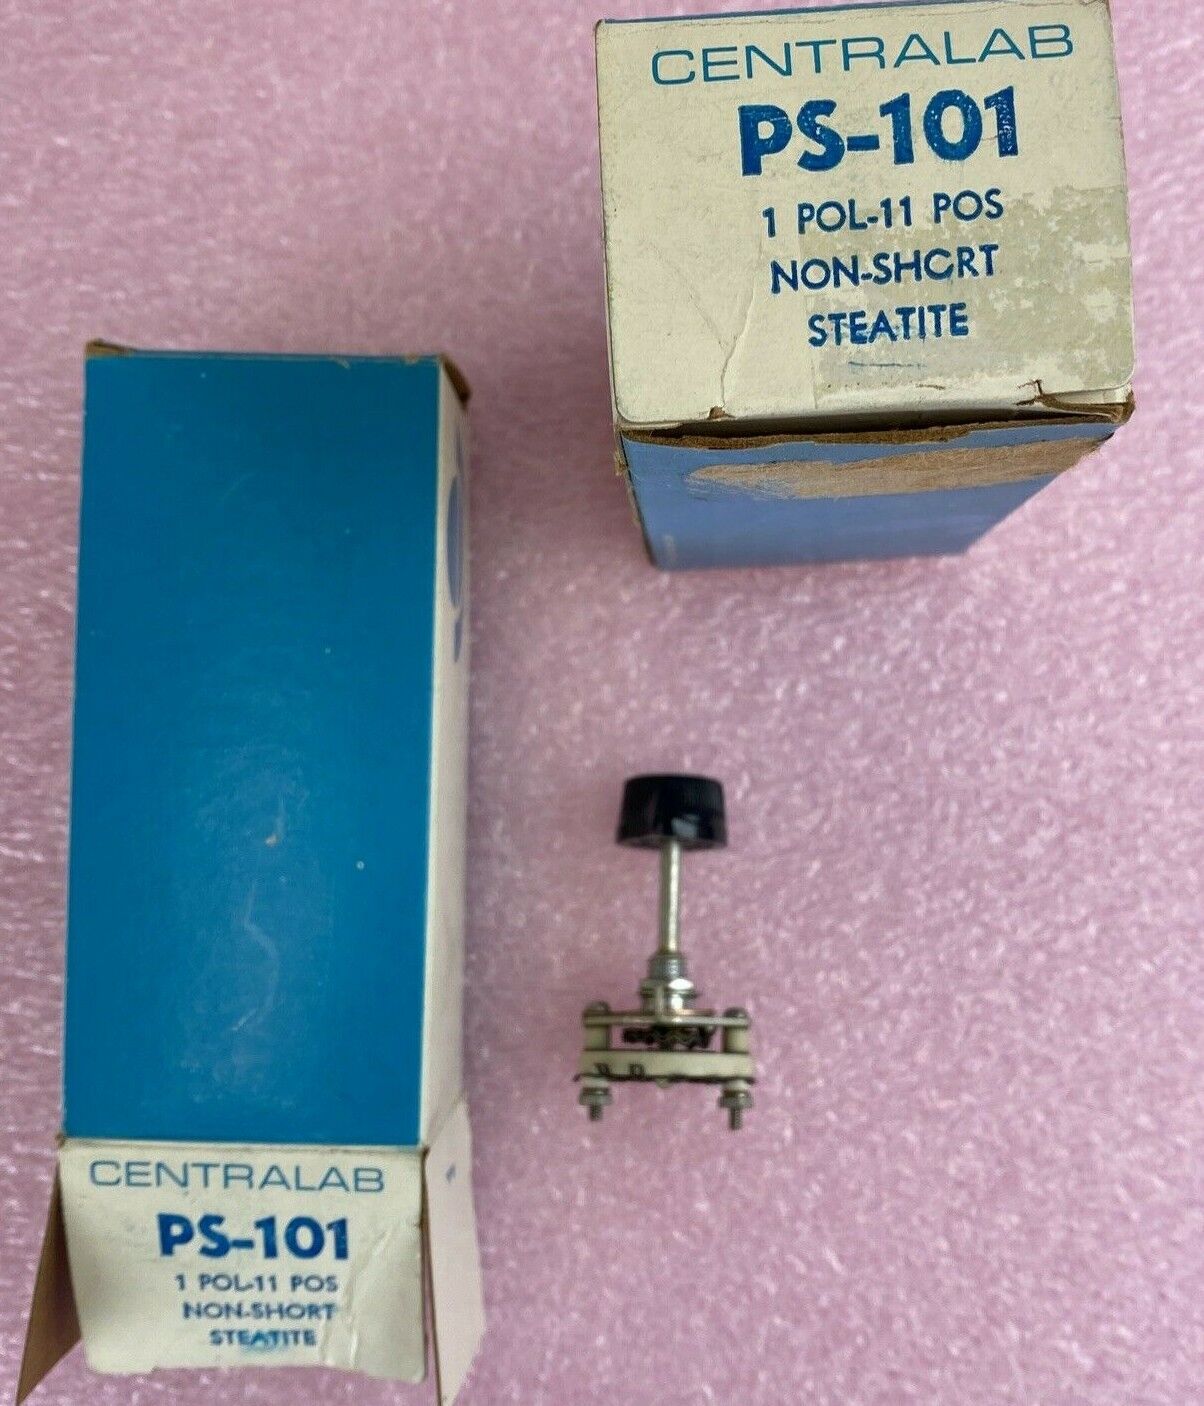 Centralab PS-101 1 pol 11 pos non-shorting Steatite switch Lot of 2